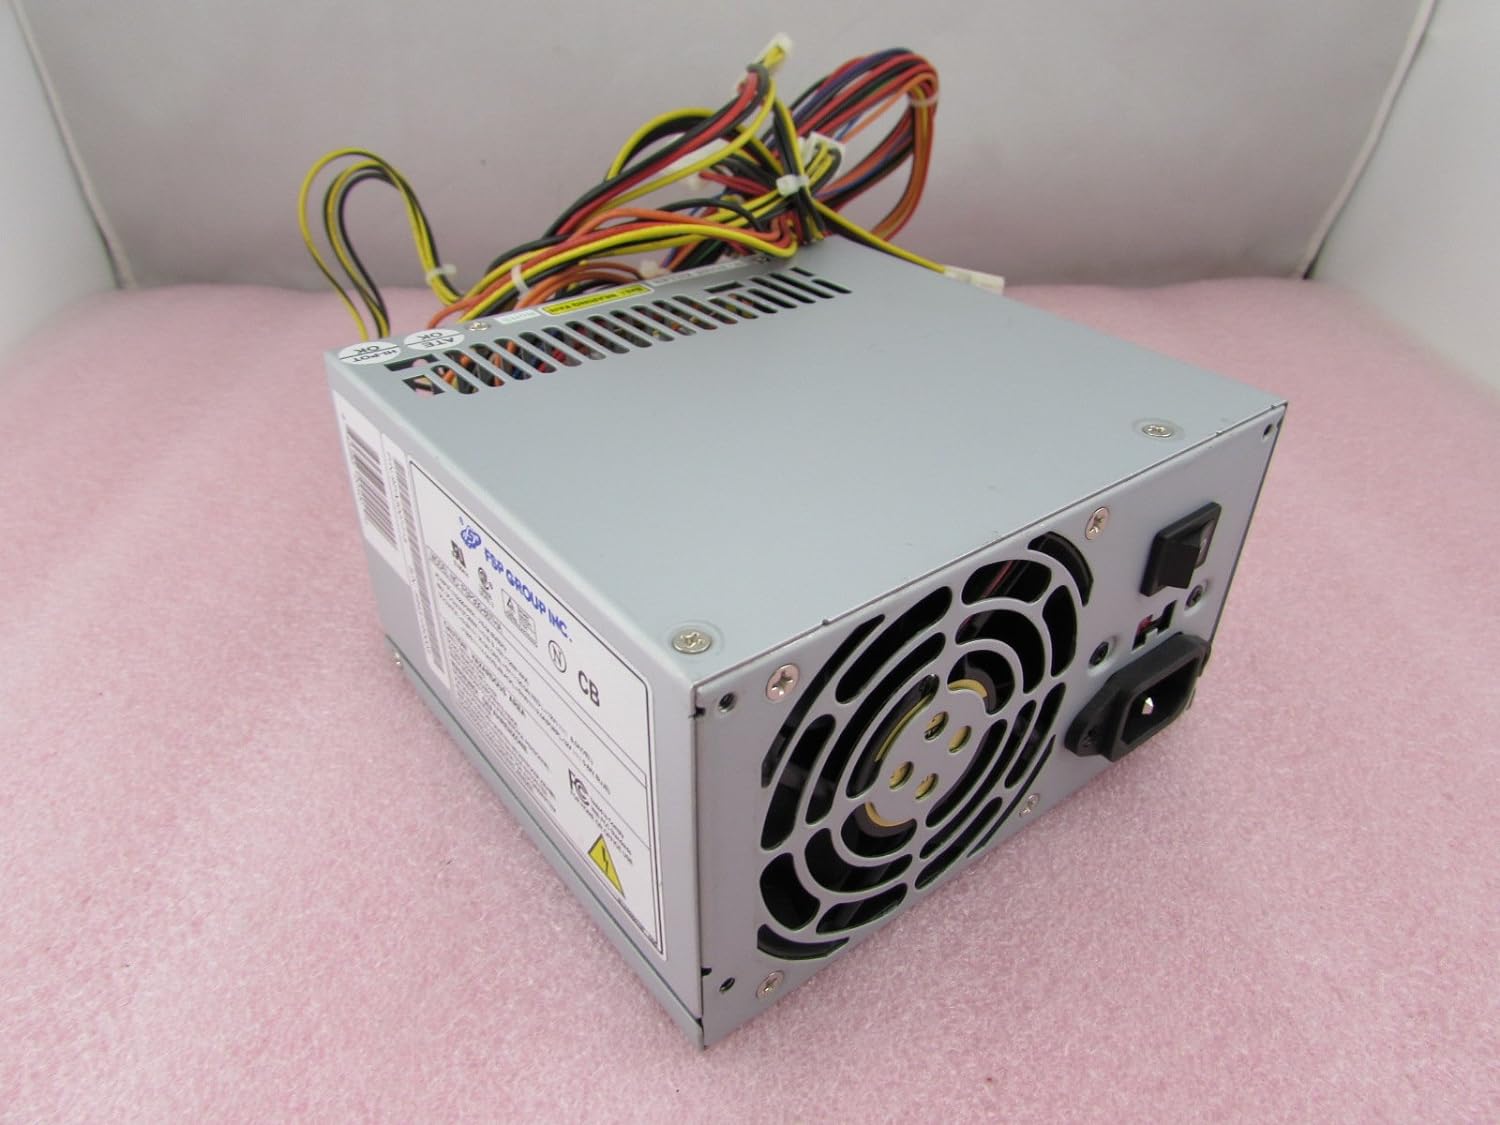 What PC Did FSP300-60Tha PSU Come In?